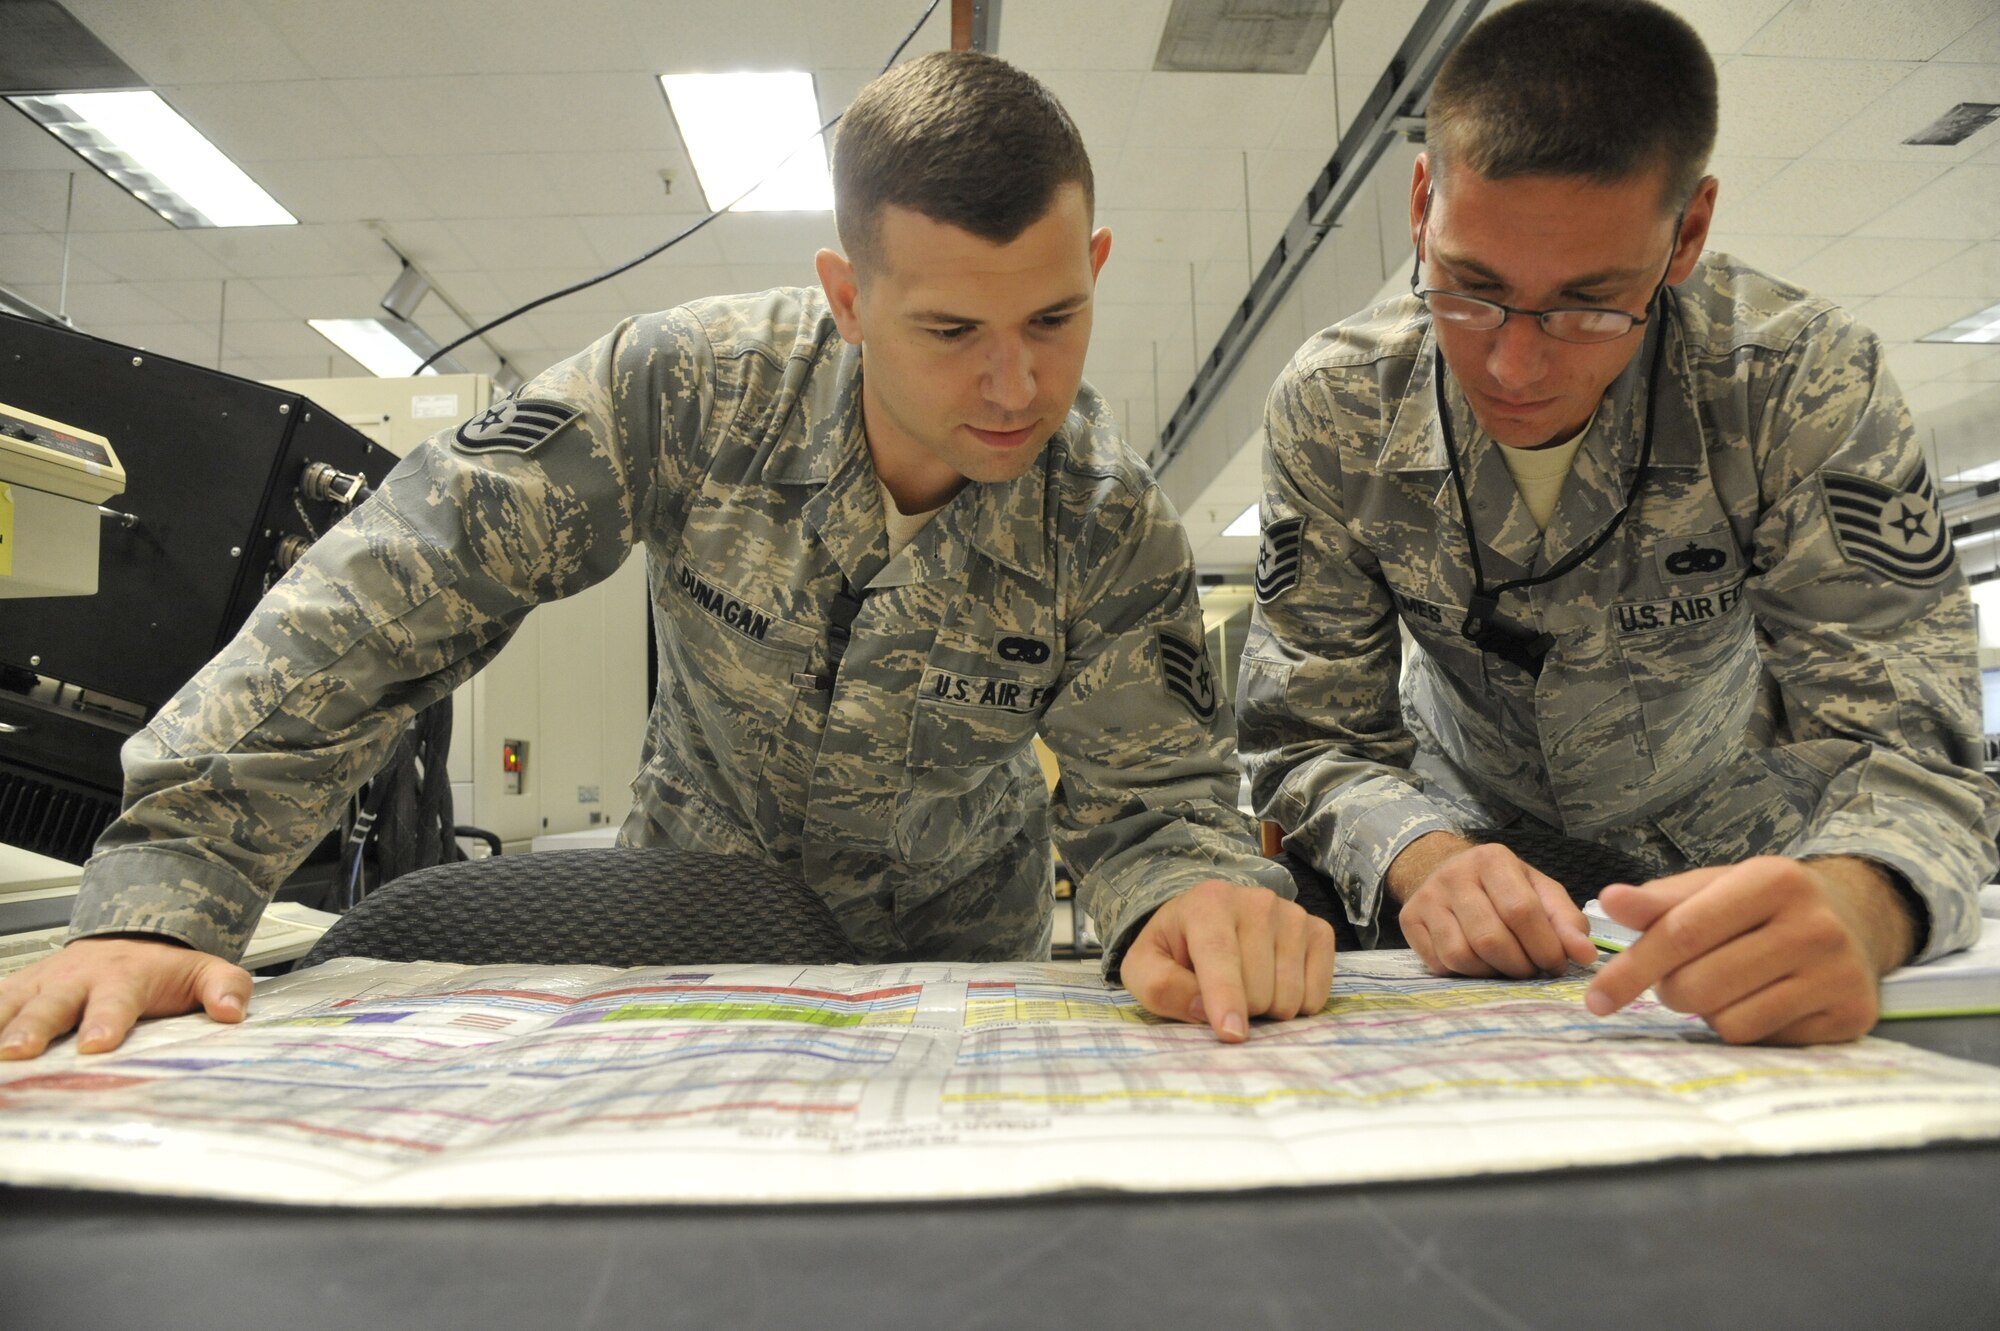 Staff Sgt. Reagan Dunagan, 509th Maintenance Squadron avionics back shop team leader, and Tech. Sgt. Jeffrey Holmes, 509th MXS avionics back shop section chief, examine a pin map at Whiteman Air Force Base, Mo., July 25, 2013. The pin map is used to help isolate faults and show where signals from test stations are coming from. (U.S. Air Force photo by Airman 1st Class Keenan Berry/Released)